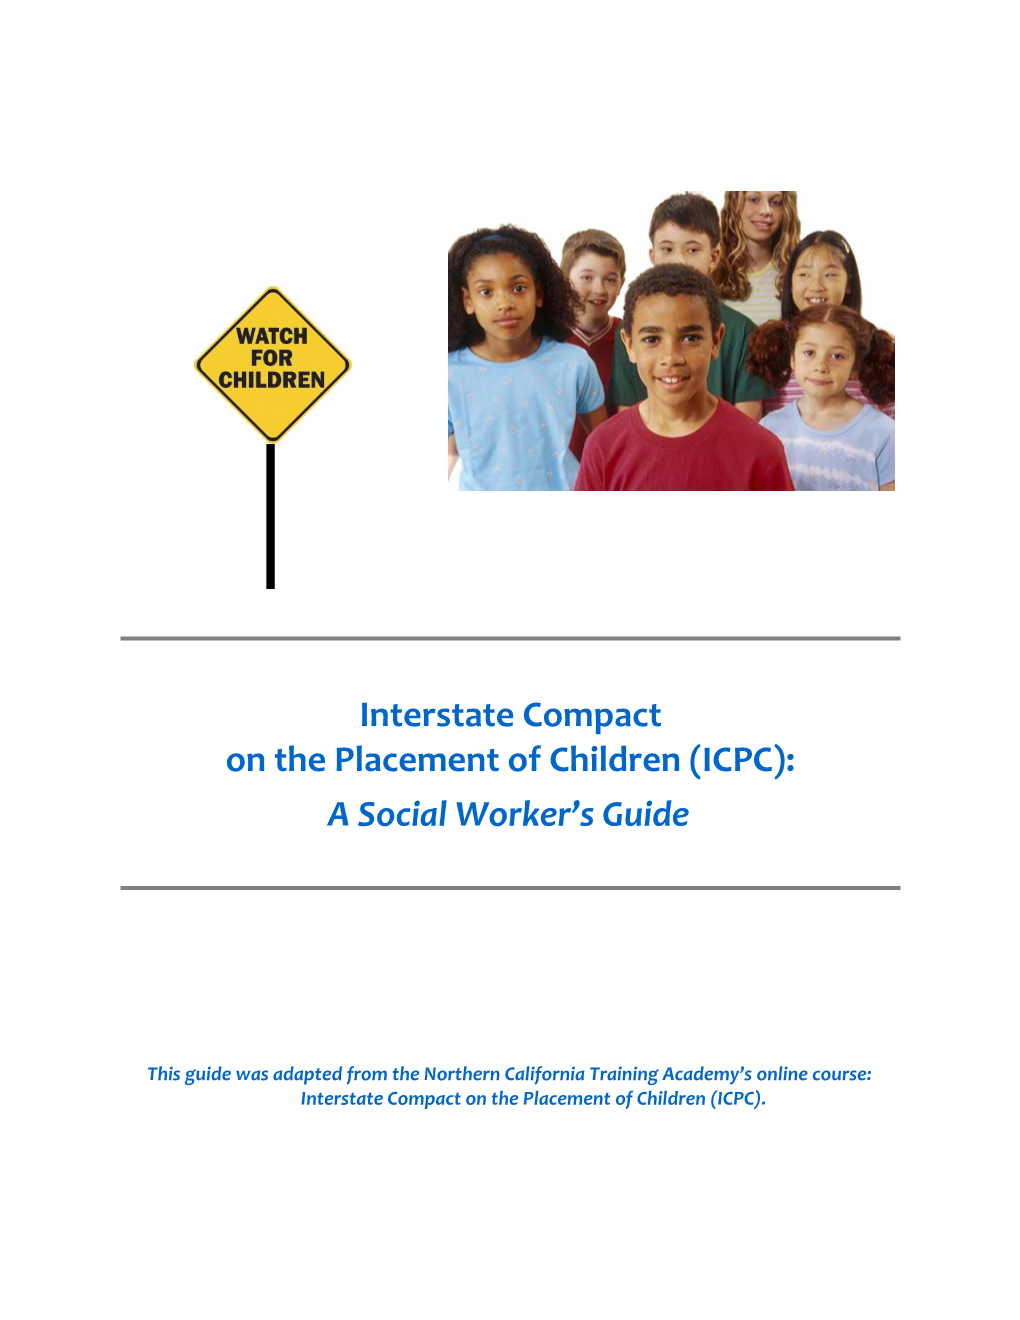 Interstate Compact On The Placement Of Children (ICPC)